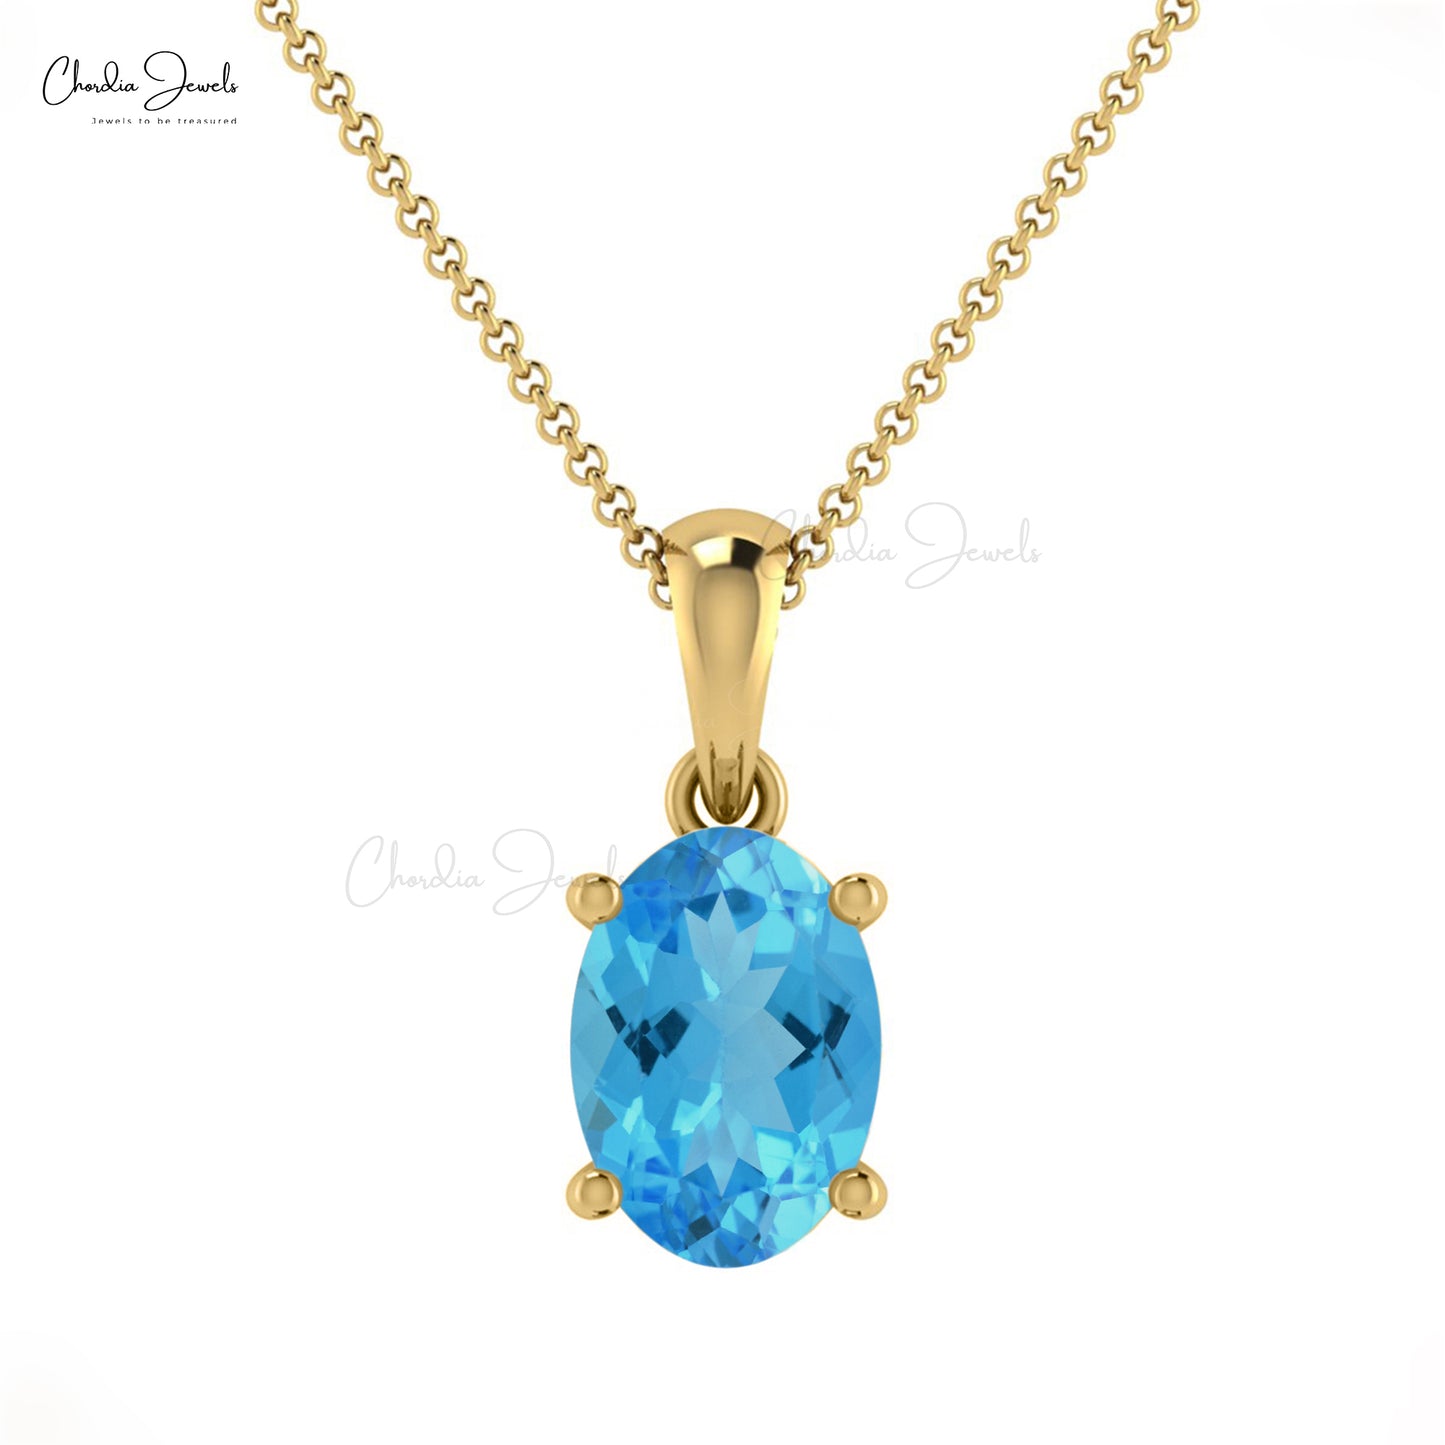 Natural Swiss Blue Topaz Solitaire Pendant 14k Real Gold Prong Set Handmade Pendant 7x5mm Oval Cut Gemstone Jewelry For Daughter